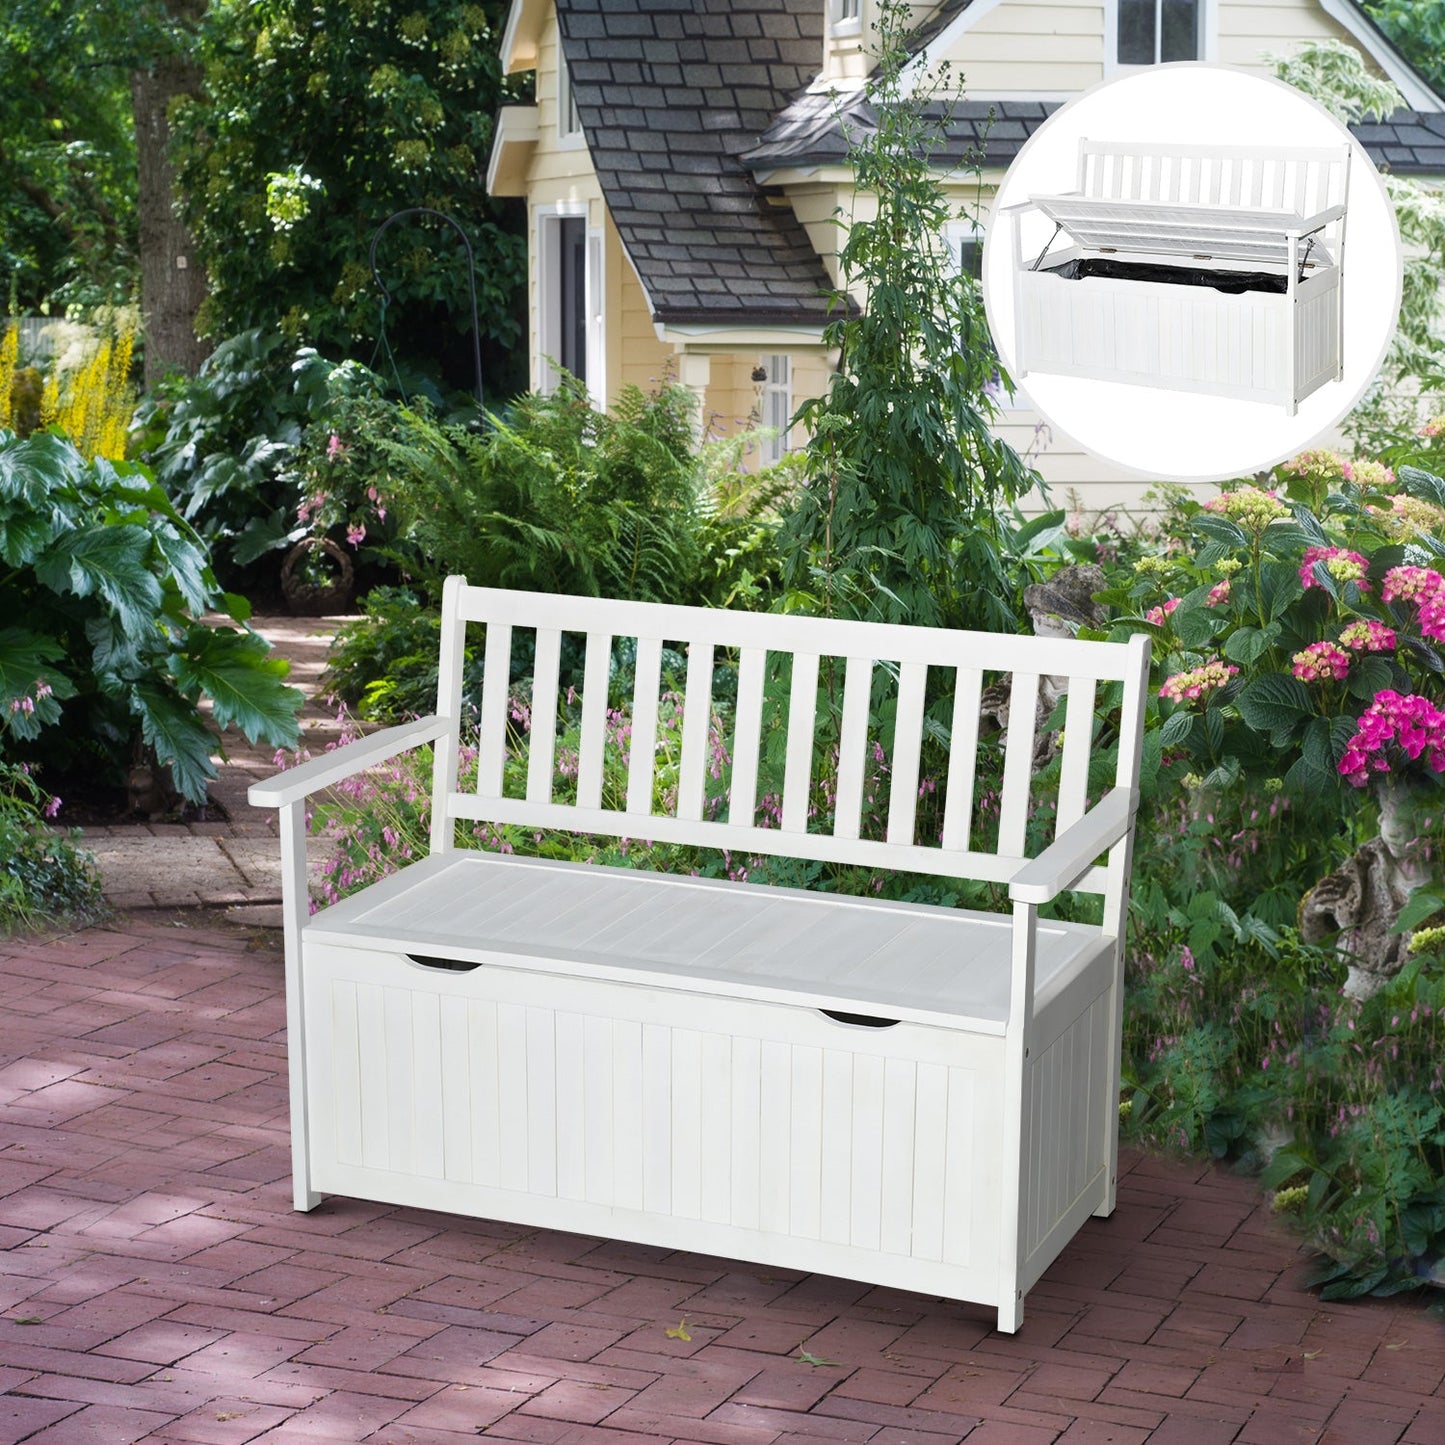 -Outsunny 41 Gallon Outdoor Storage Bench, Wooden Deck Box with Inner waterproof PE Lining, 2-Seat Container Perfect for Patio Garden, White - Outdoor Style Company